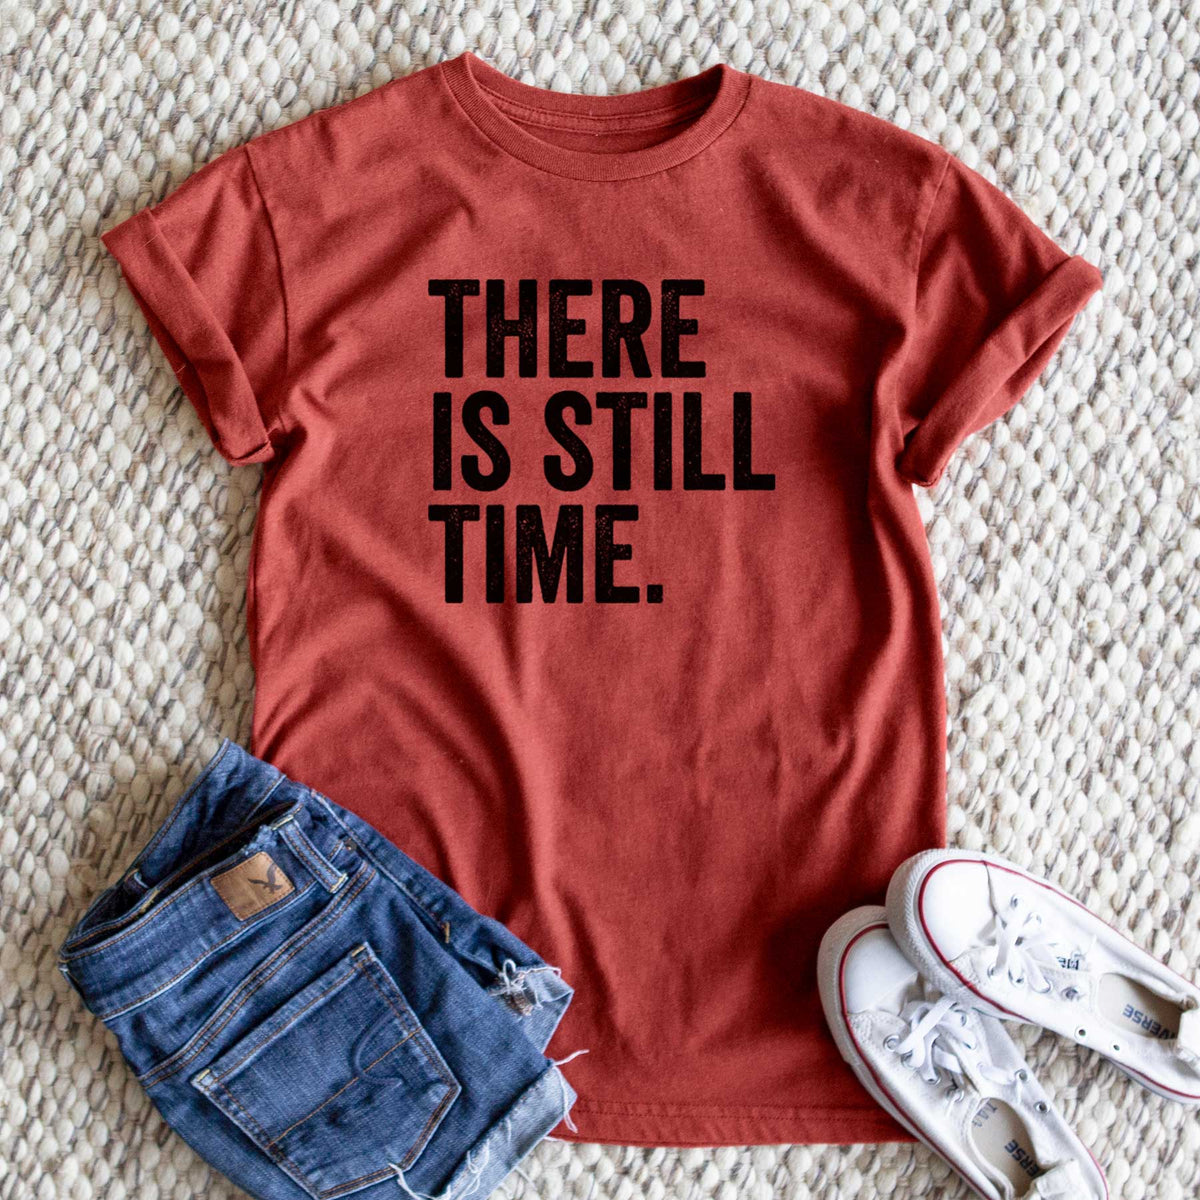 There&#39;s Still Time - Unisex Recycled Eco Tee  - CLOSEOUT - FINAL SALE